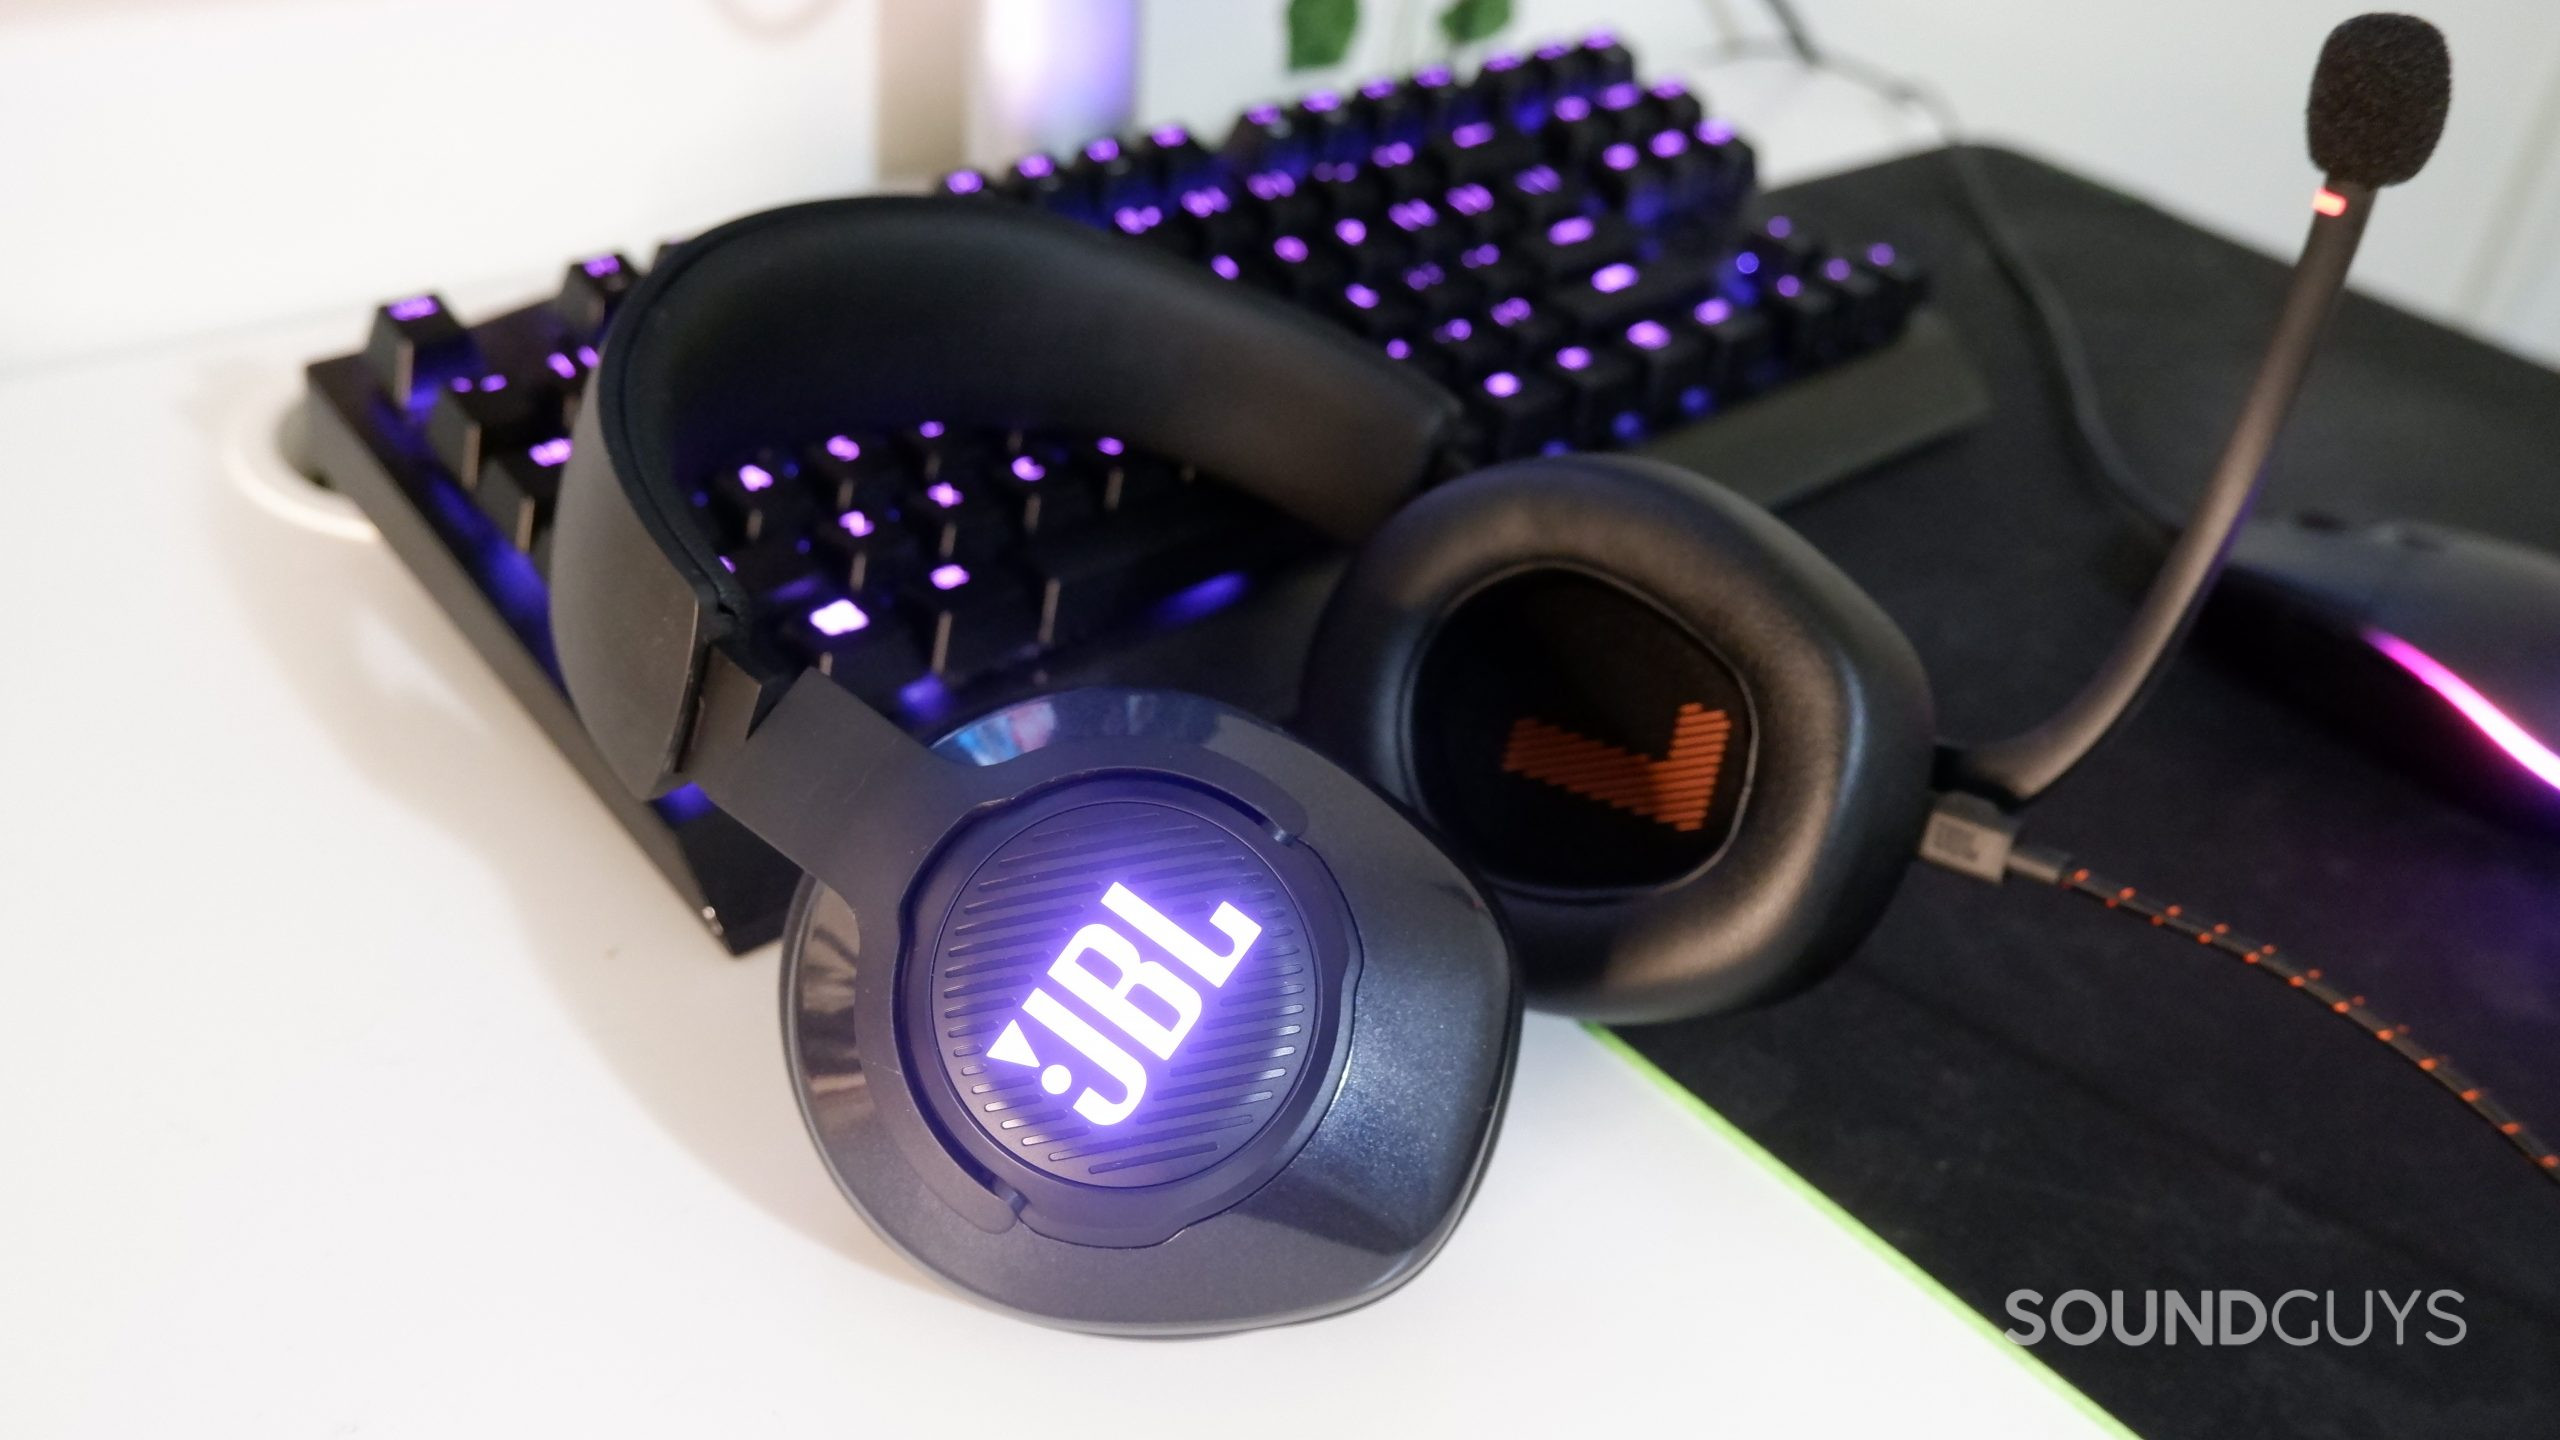 JBL Quantum 400 Wired Over-Ear Gaming Headset